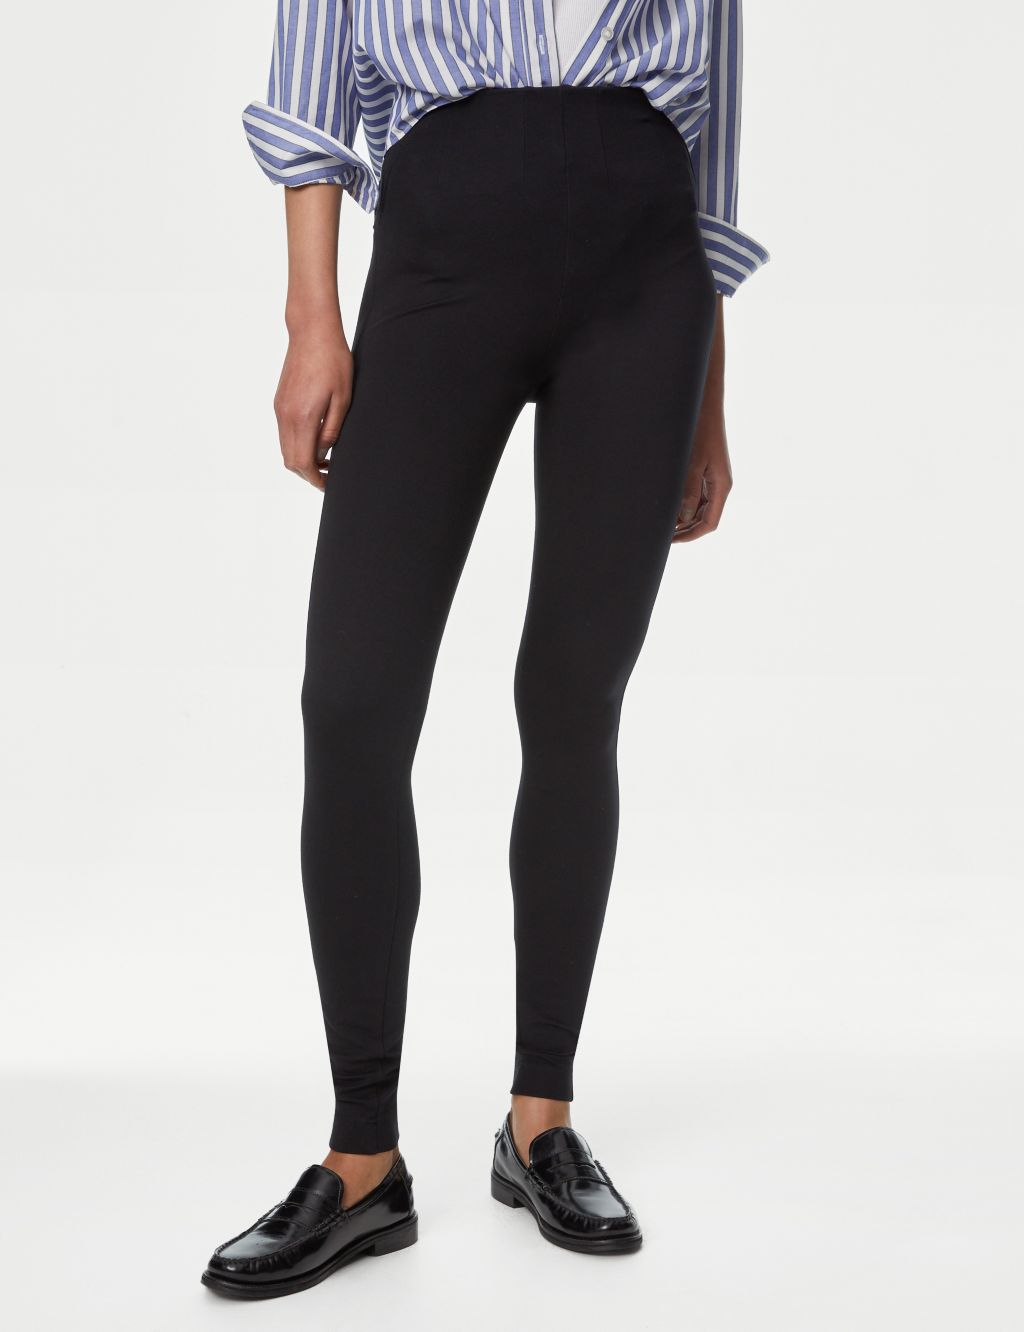 Stay New™ High Waisted Leggings, M&S Collection